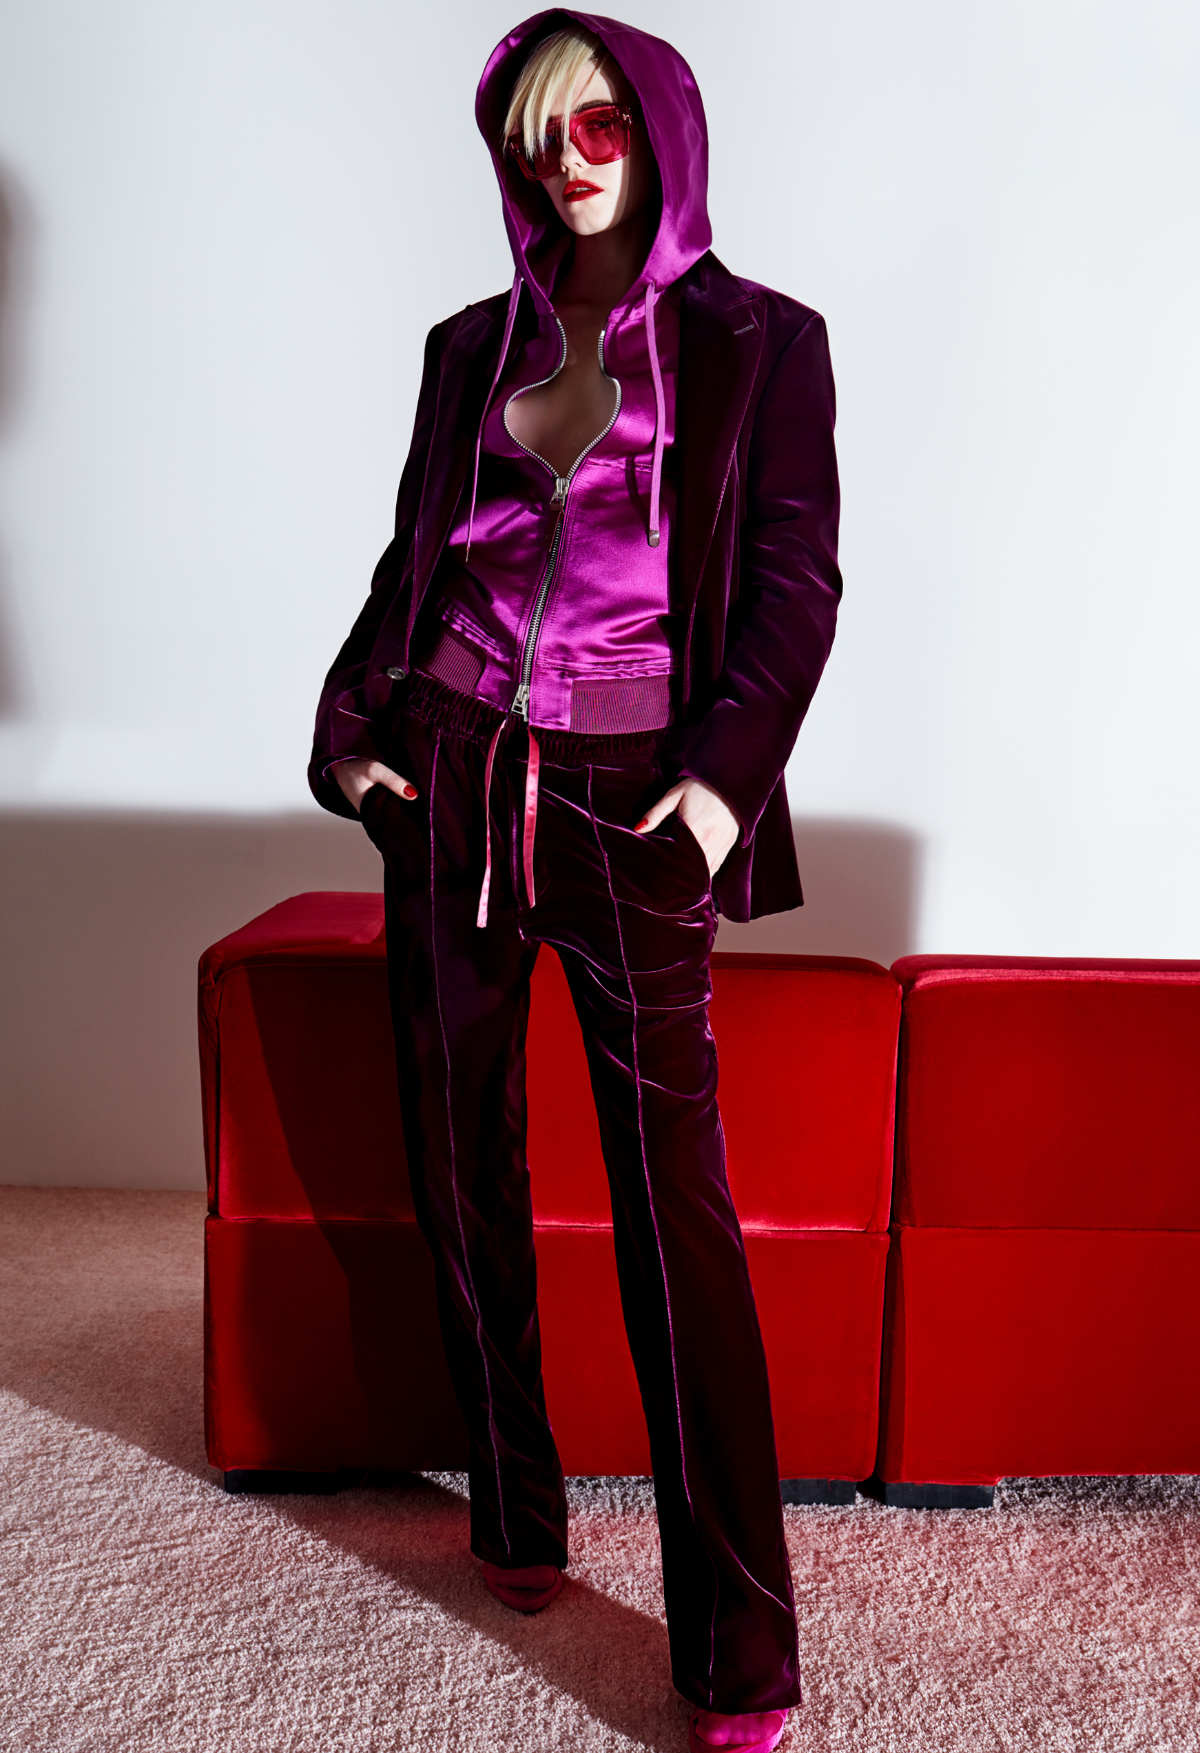 Tom Ford Presents His New Autumn/Winter 2022 Womenswear Collection